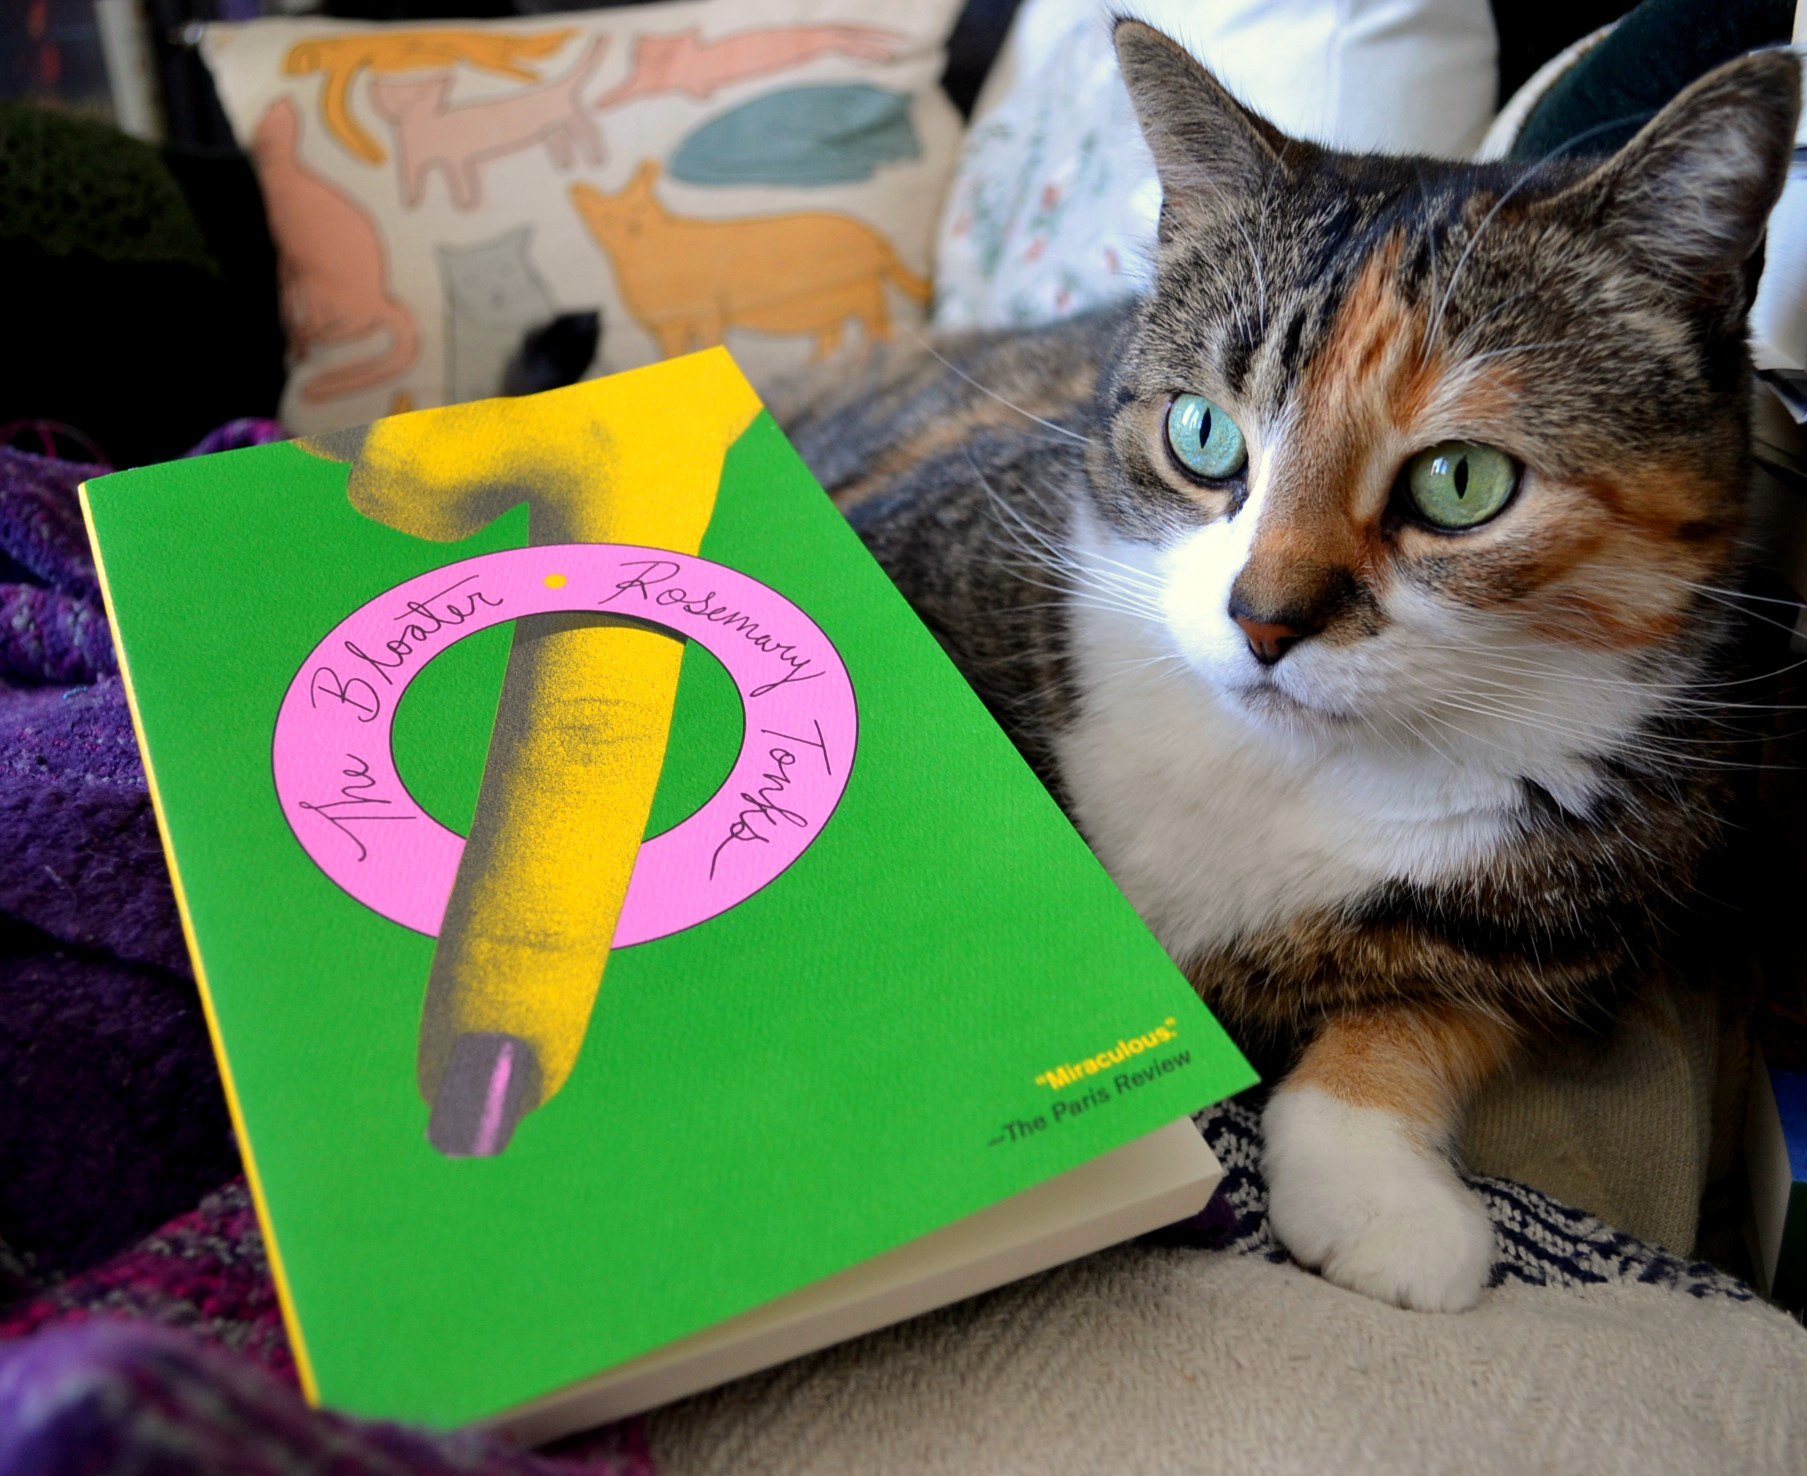 A calico tabby with bright green eyes sits beside a vibrant green book with a neon yellow finger on it.